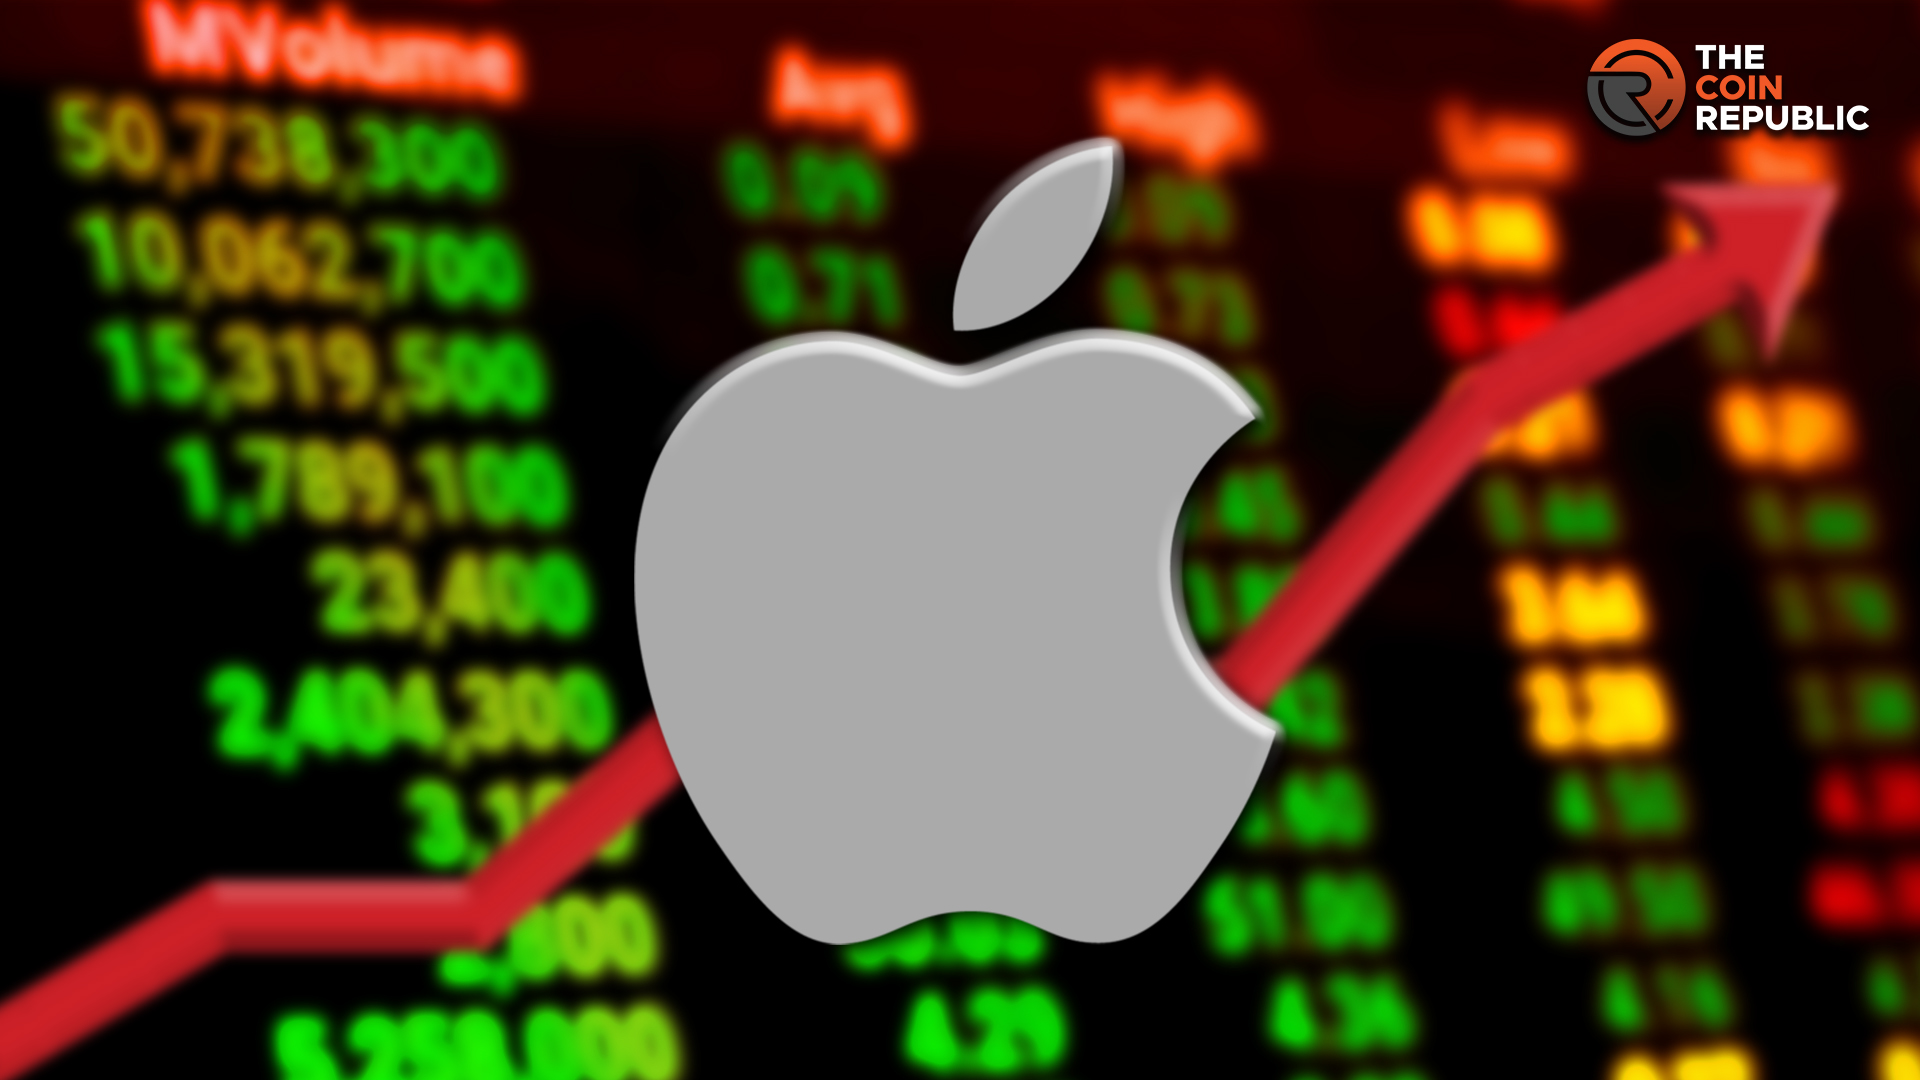 Apple Stock Price Prediction: Can AAPL Fall Beneath $170 Mark?